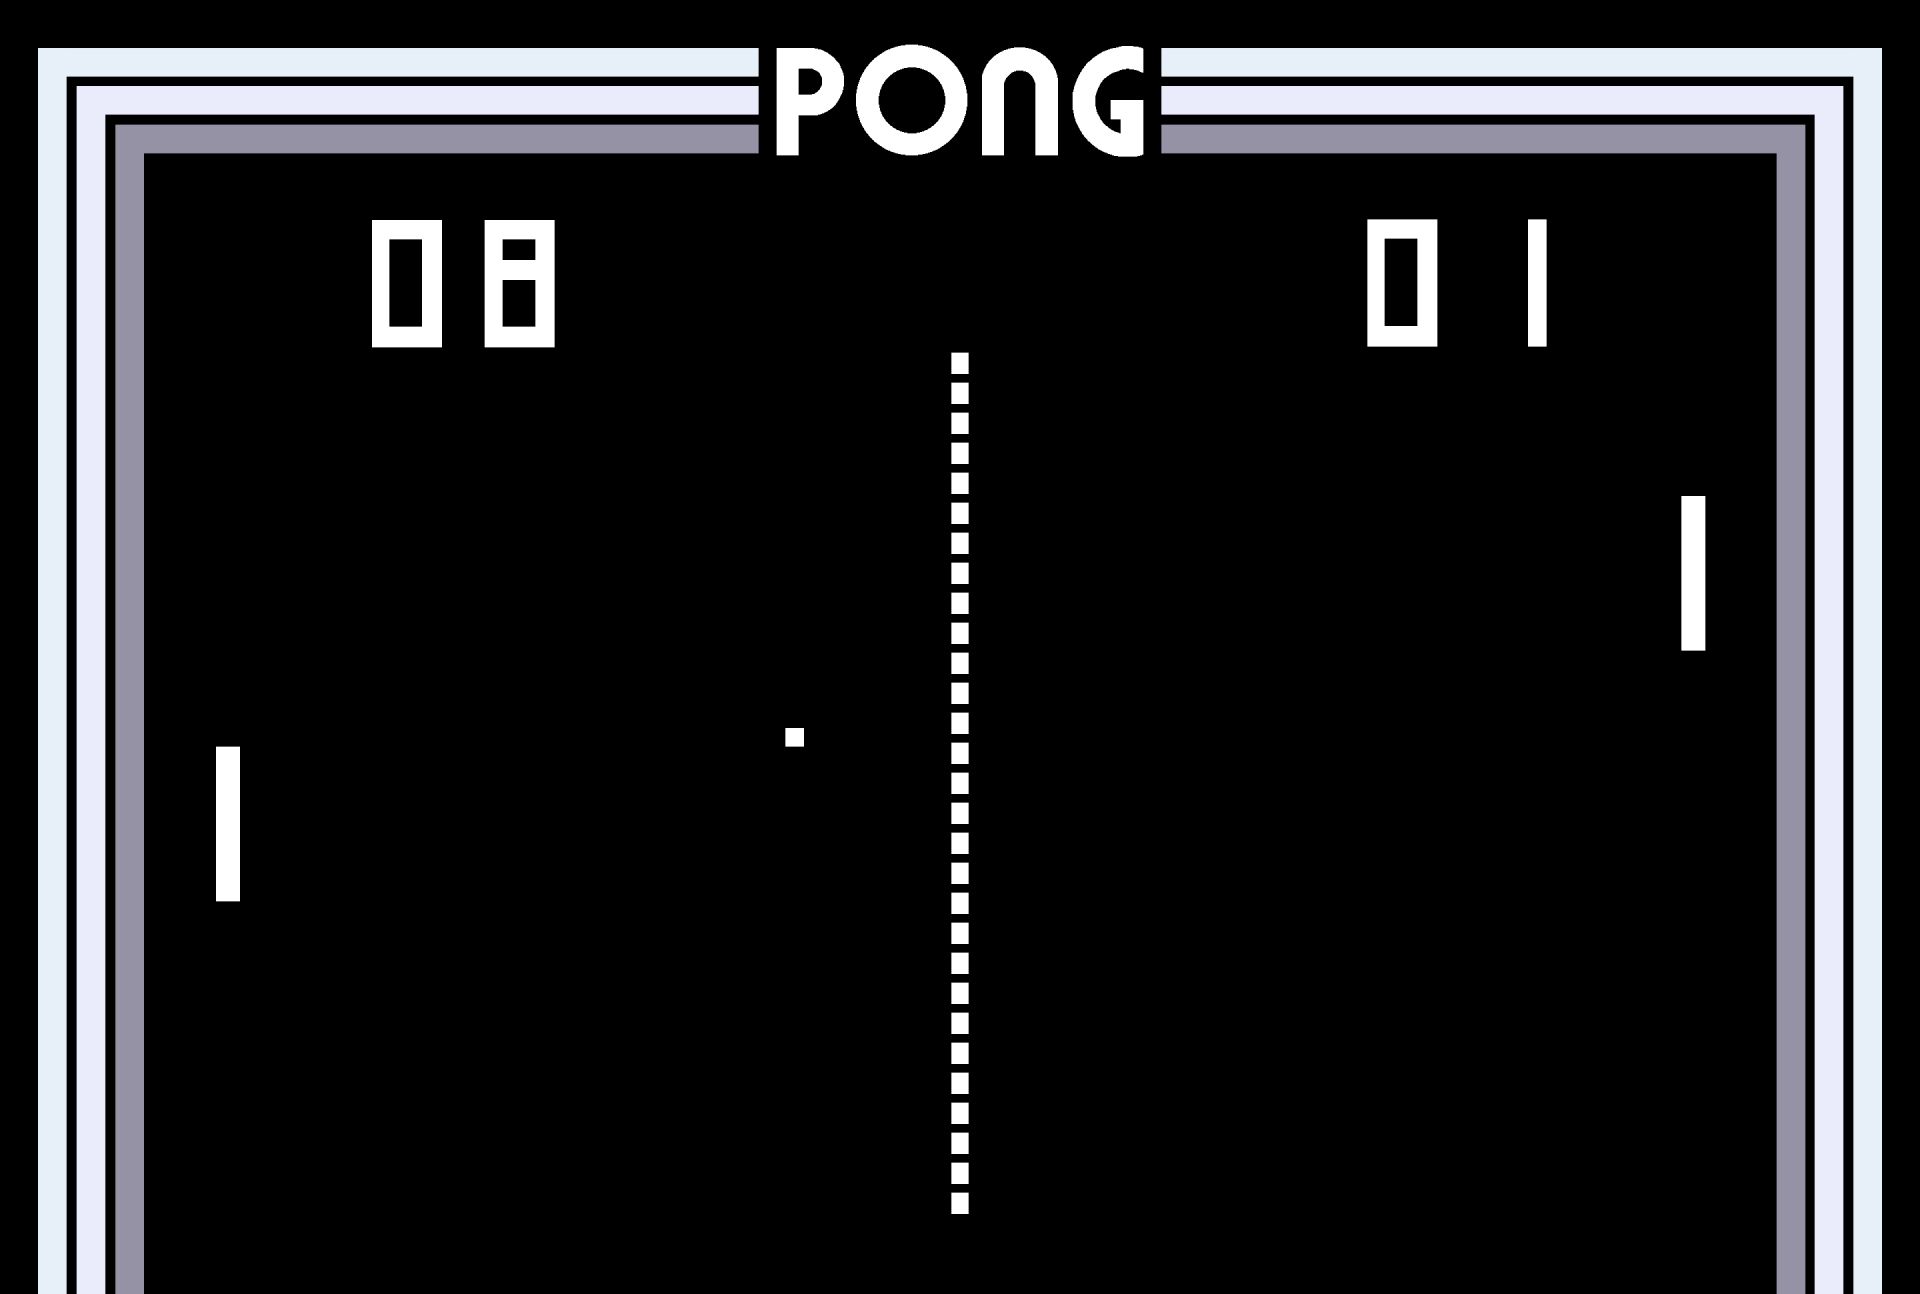 Create your first Pong game using HTML5 Canvas and JavaScript